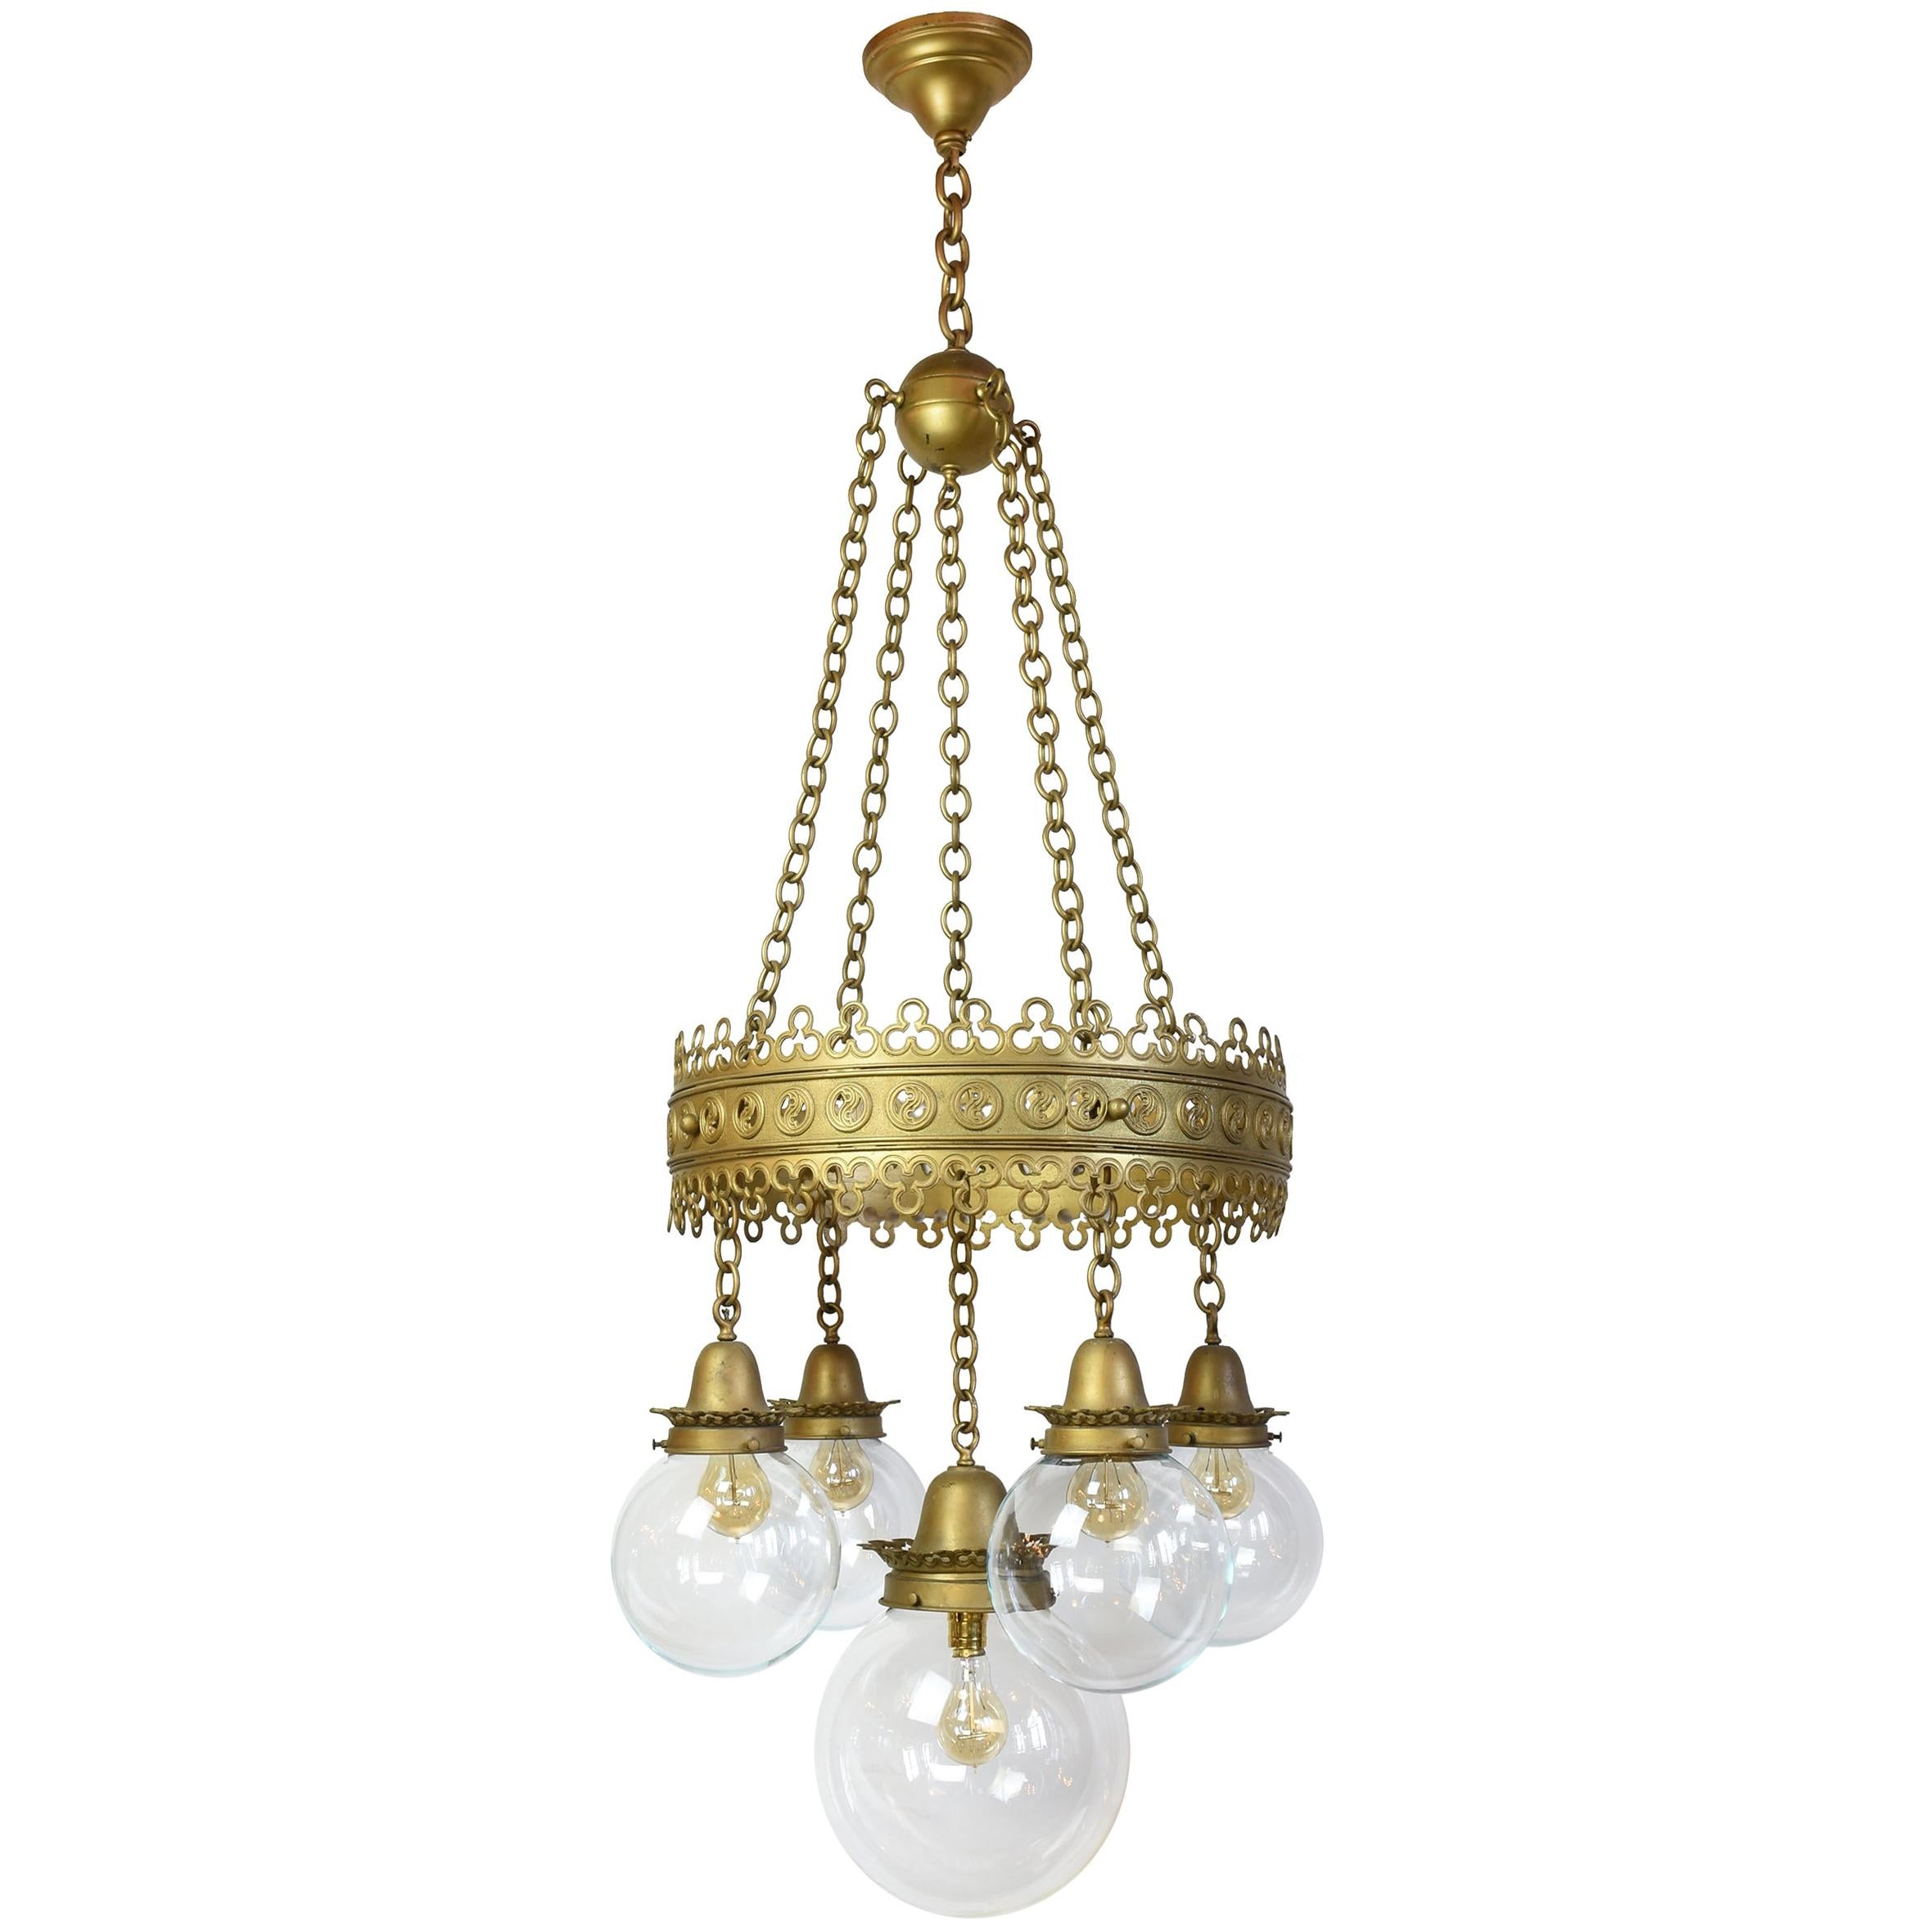 Gothic Pendant Fixture with Decorative Ring and Original Glass